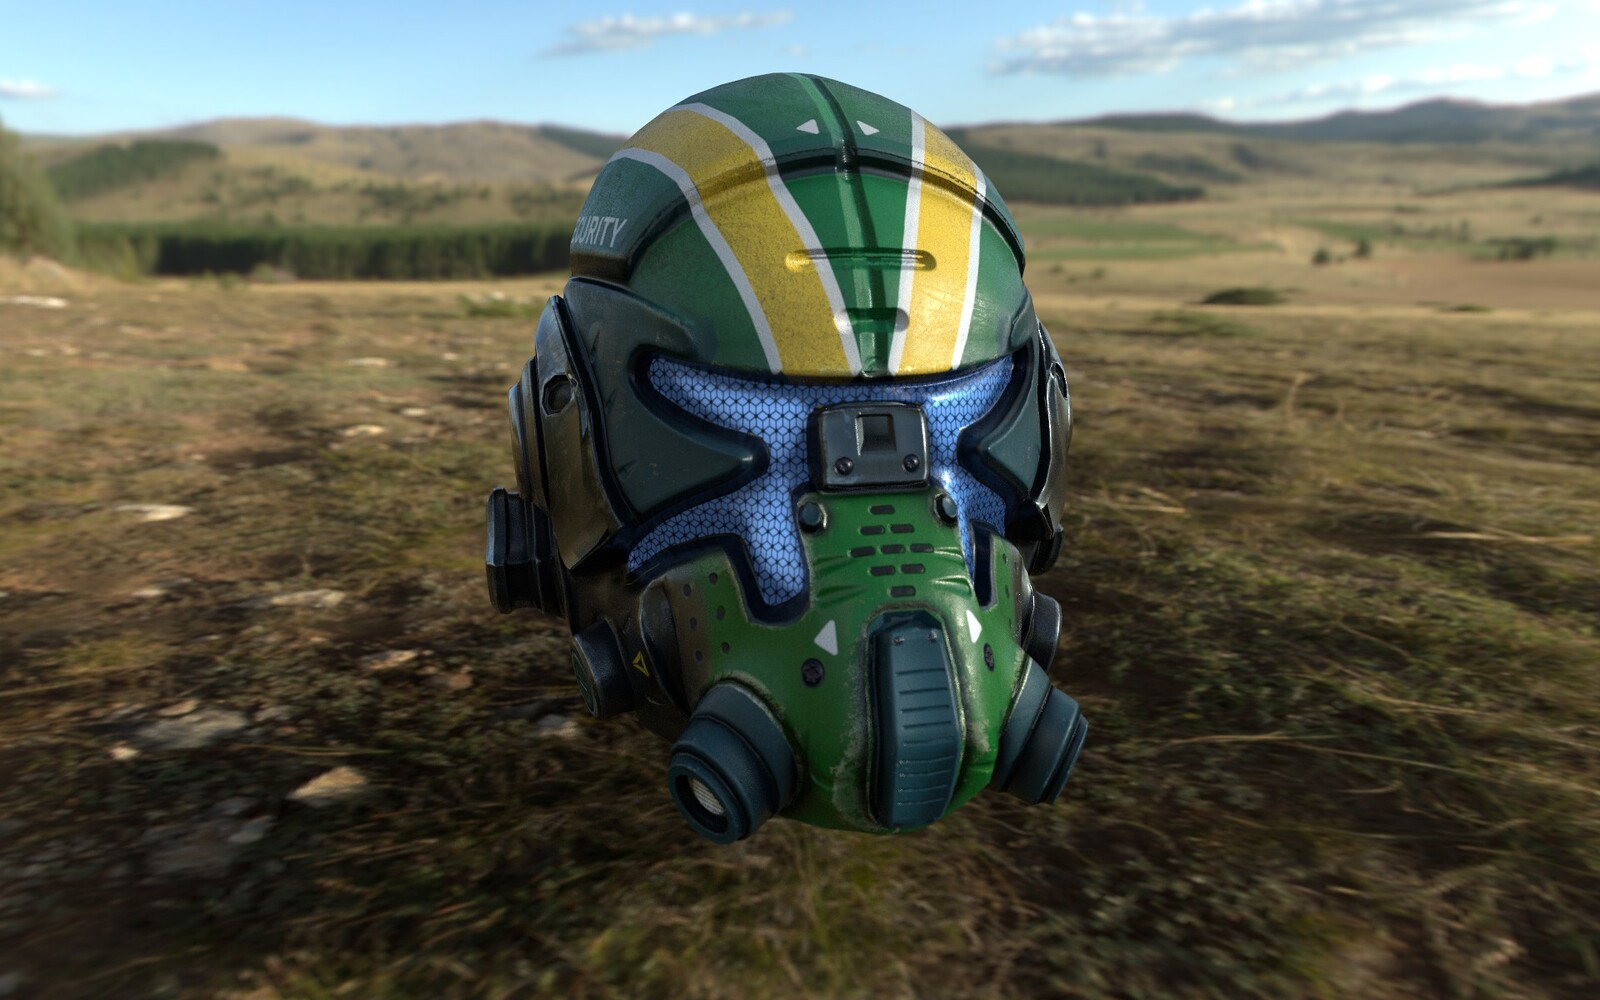 Front View Rendered in Substance Painter